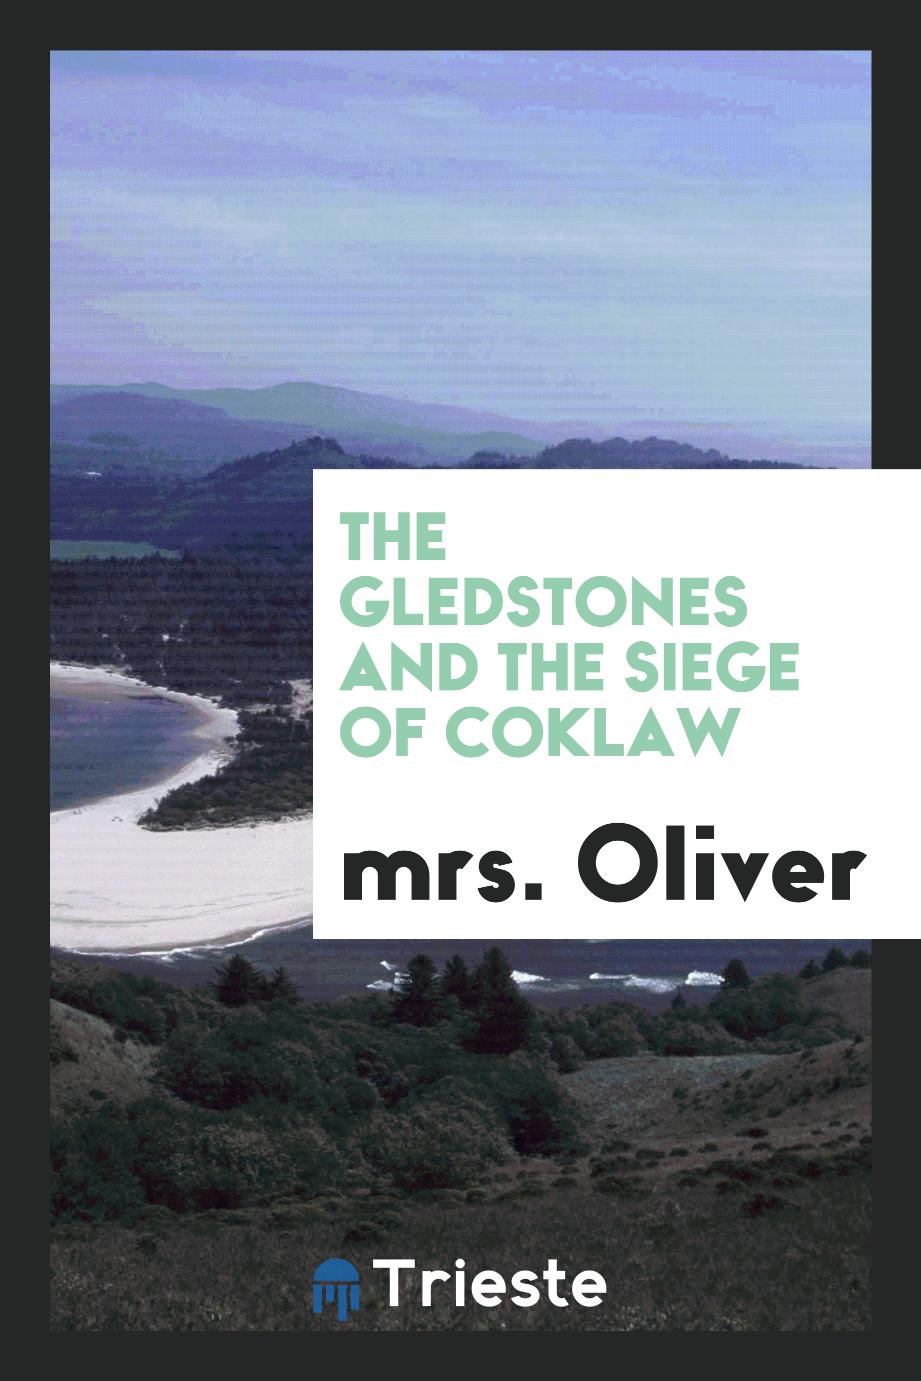 The Gledstones and the Siege of Coklaw